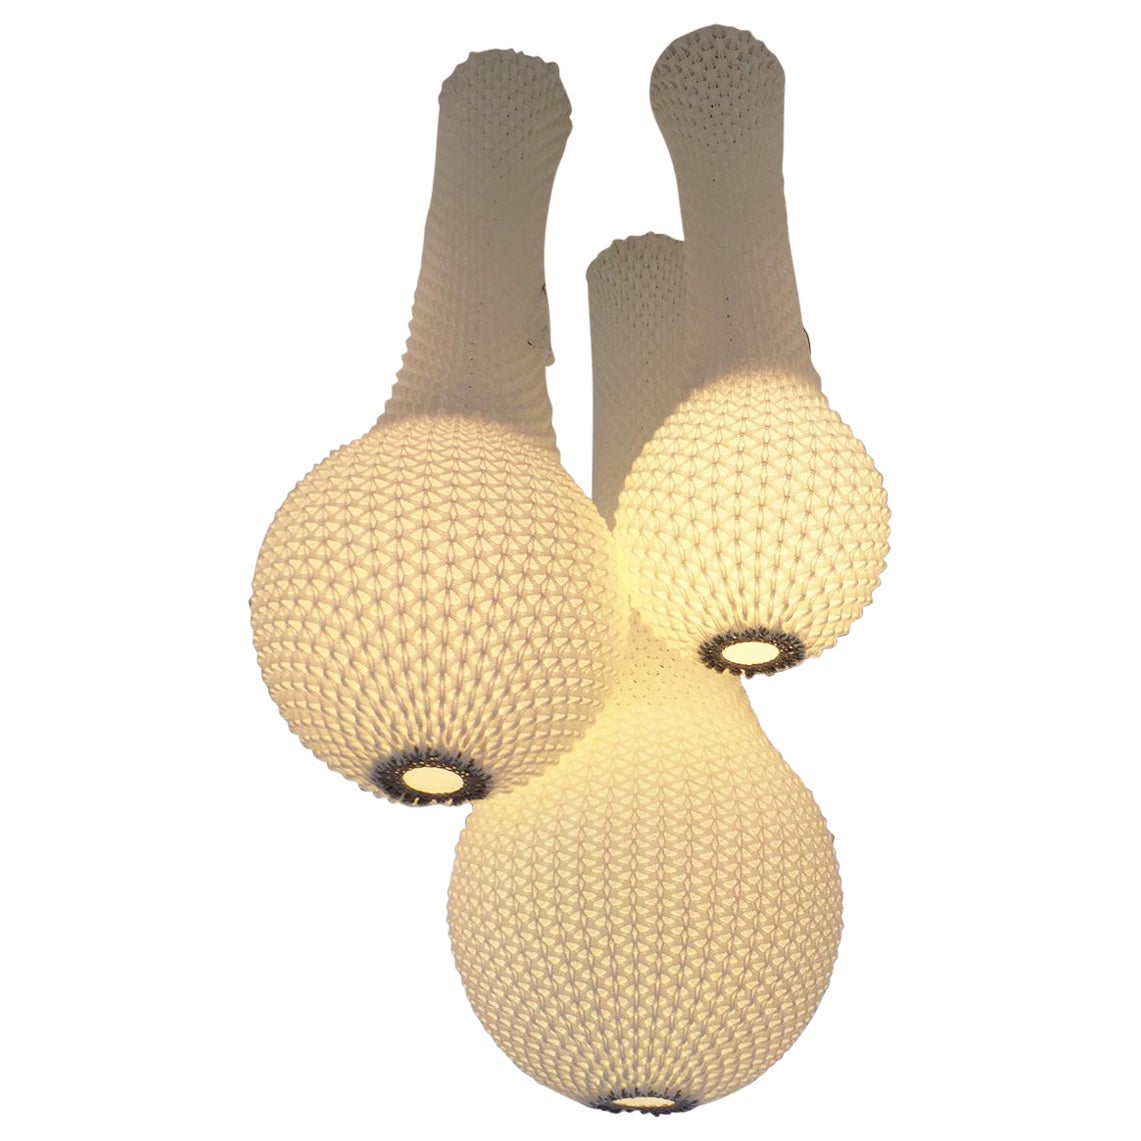 Knitted Lighting Fixture Chandelier -Set Of 3 Units For Sale